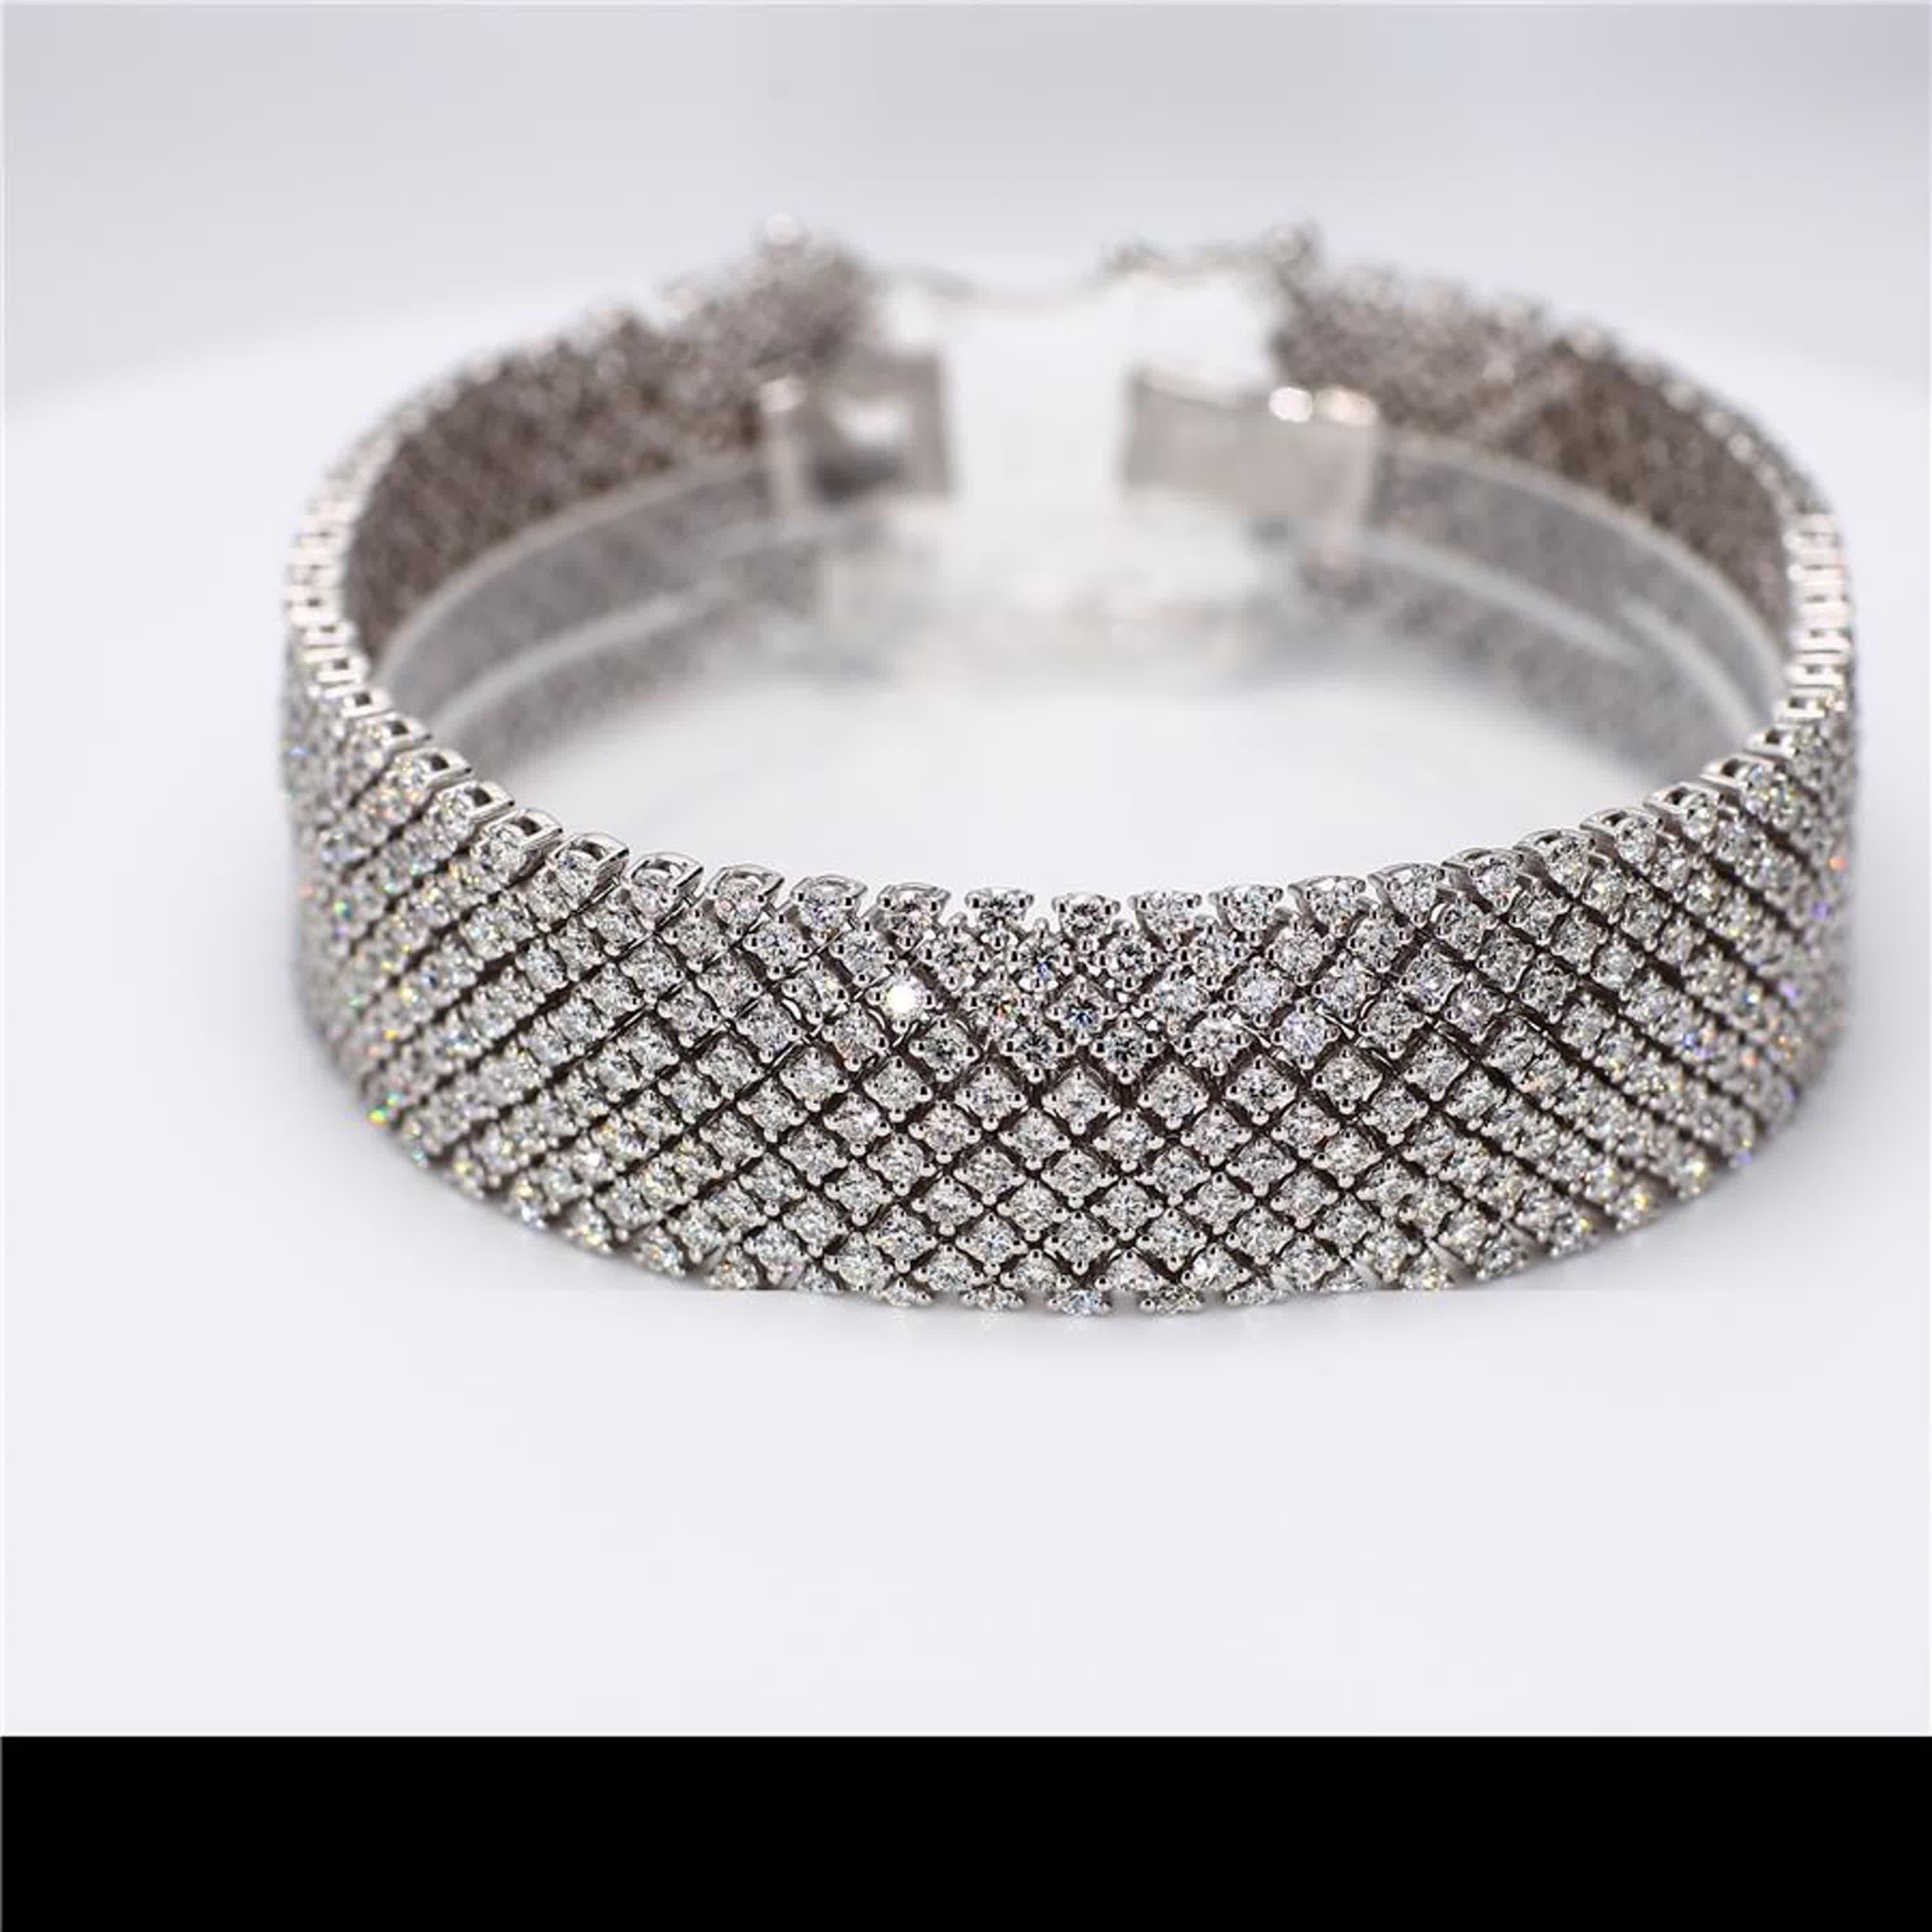 RareGemWorld's classic diamond bracelet. Mounted in a beautiful 14K White Gold setting with round natural white diamond melee. This bracelet is guaranteed to impress and enhance your personal collection.

Total Weight: 15.00cts

Diamond